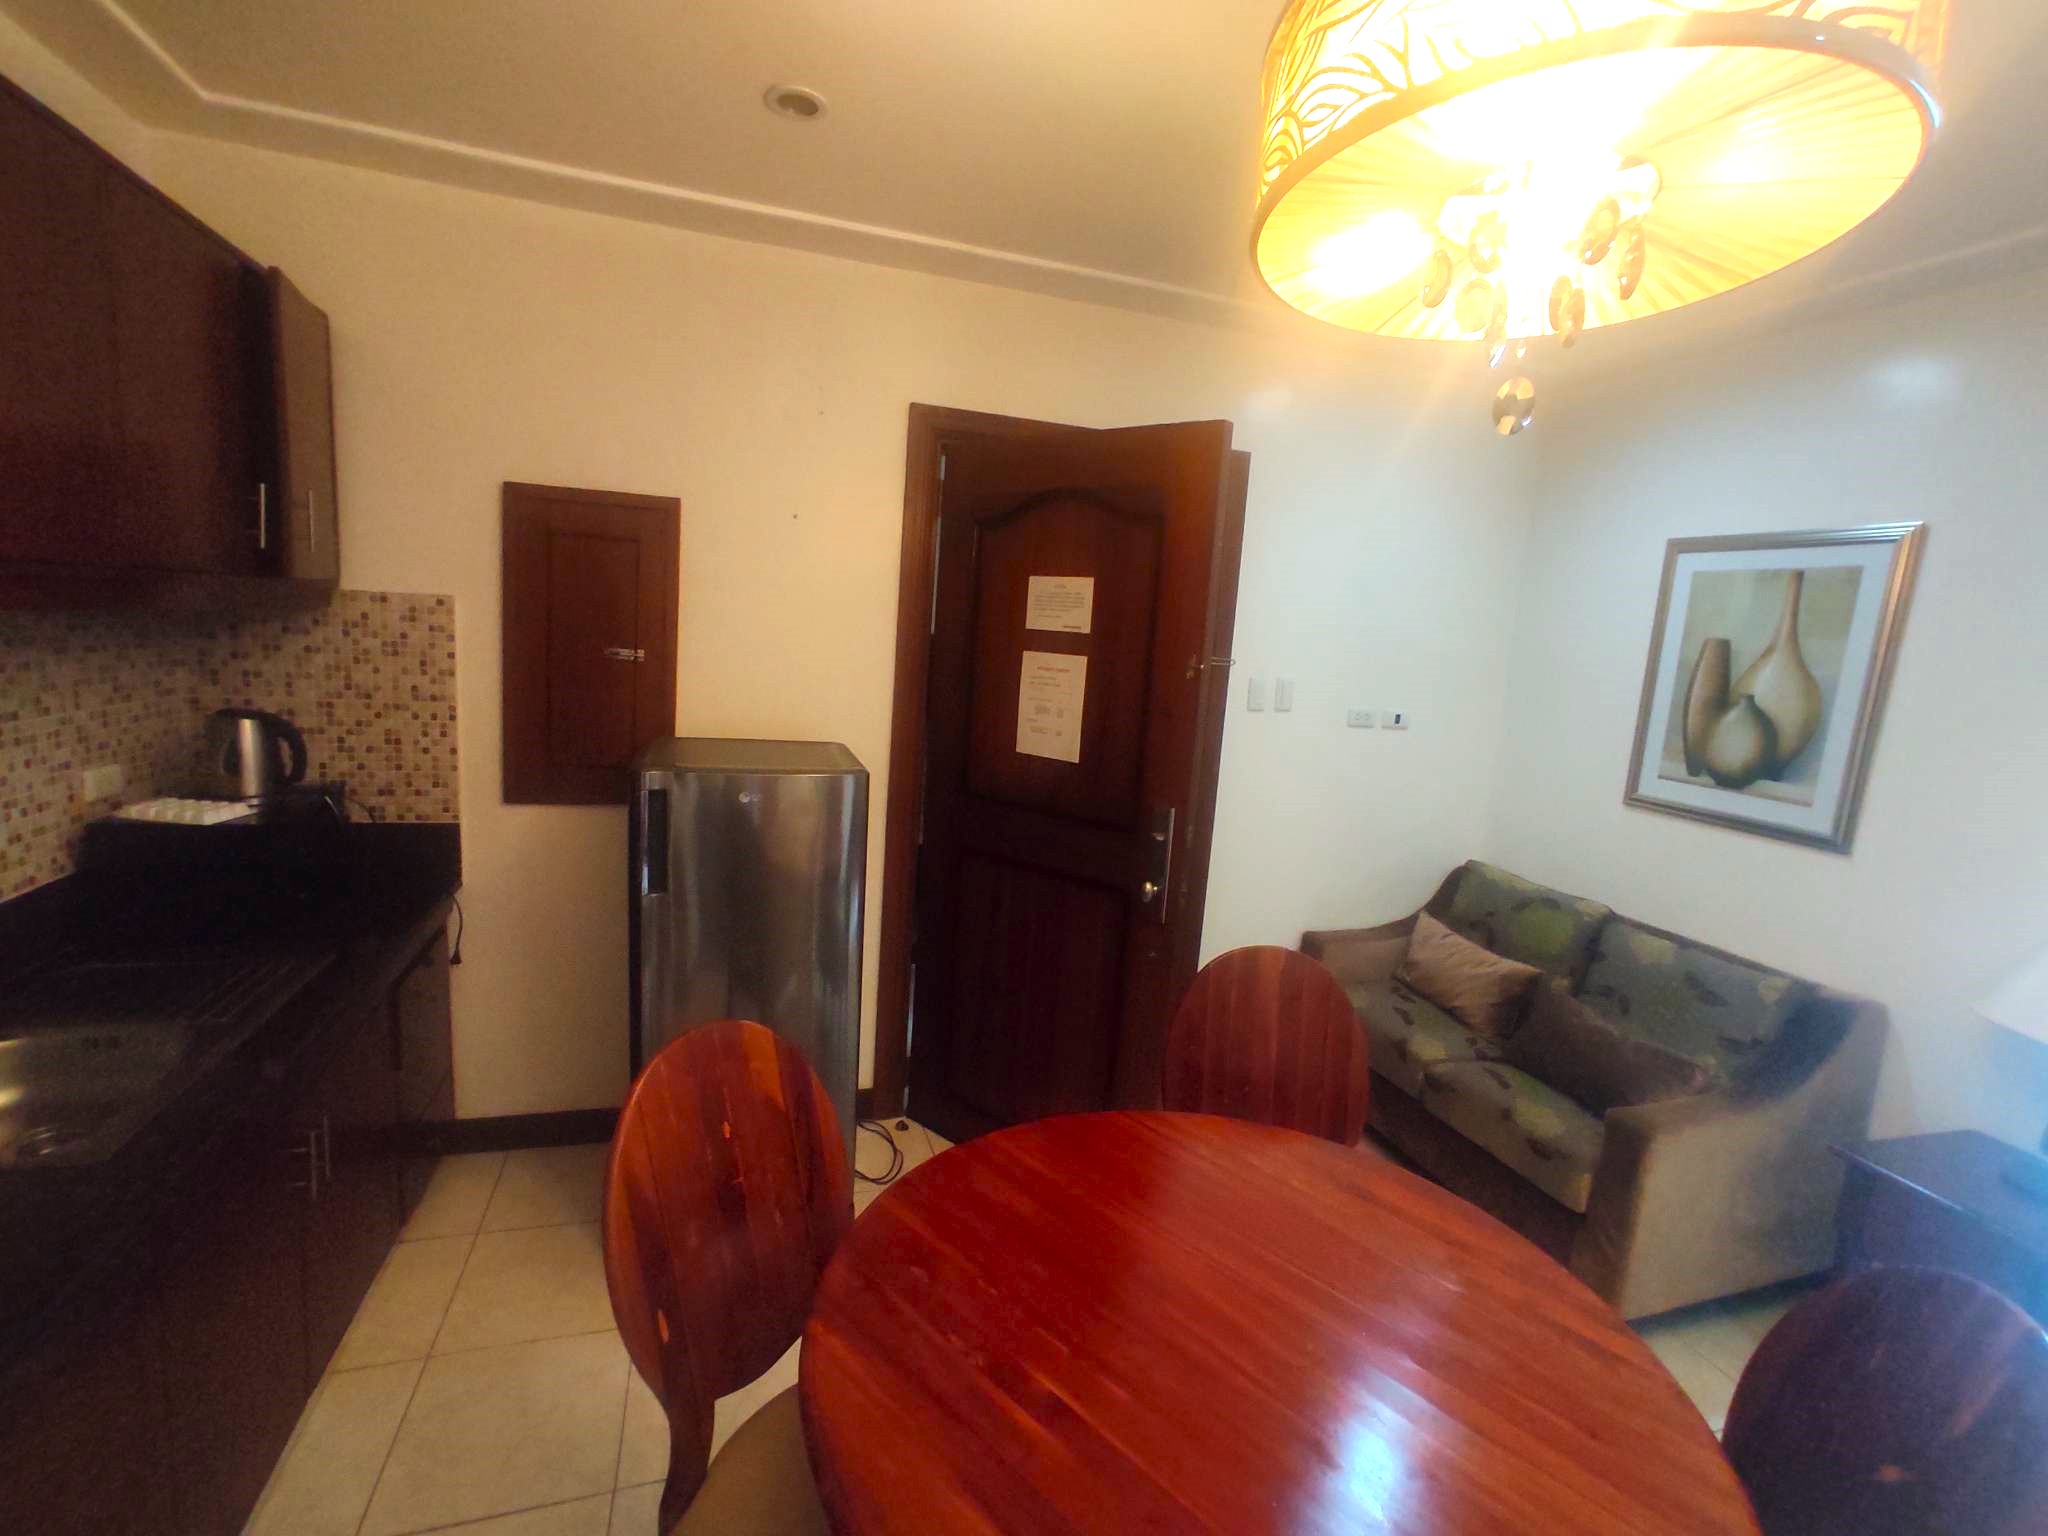 2-bedroom-fully-furnished-apartment-with-wifi-located-near-ayala-cebu-city